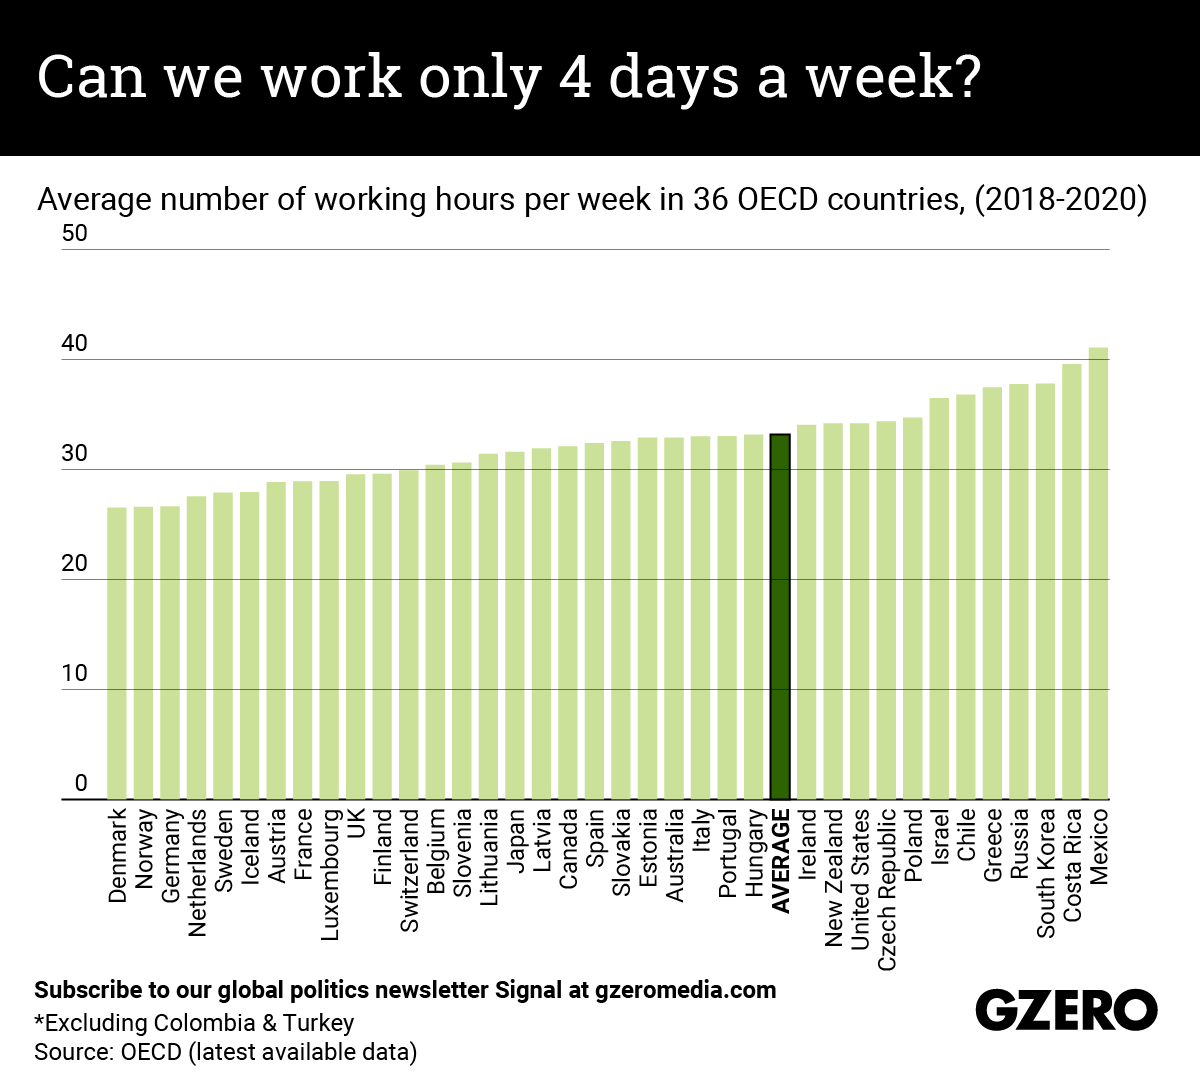 The Graphic Truth: Can we work only 4 days a week?